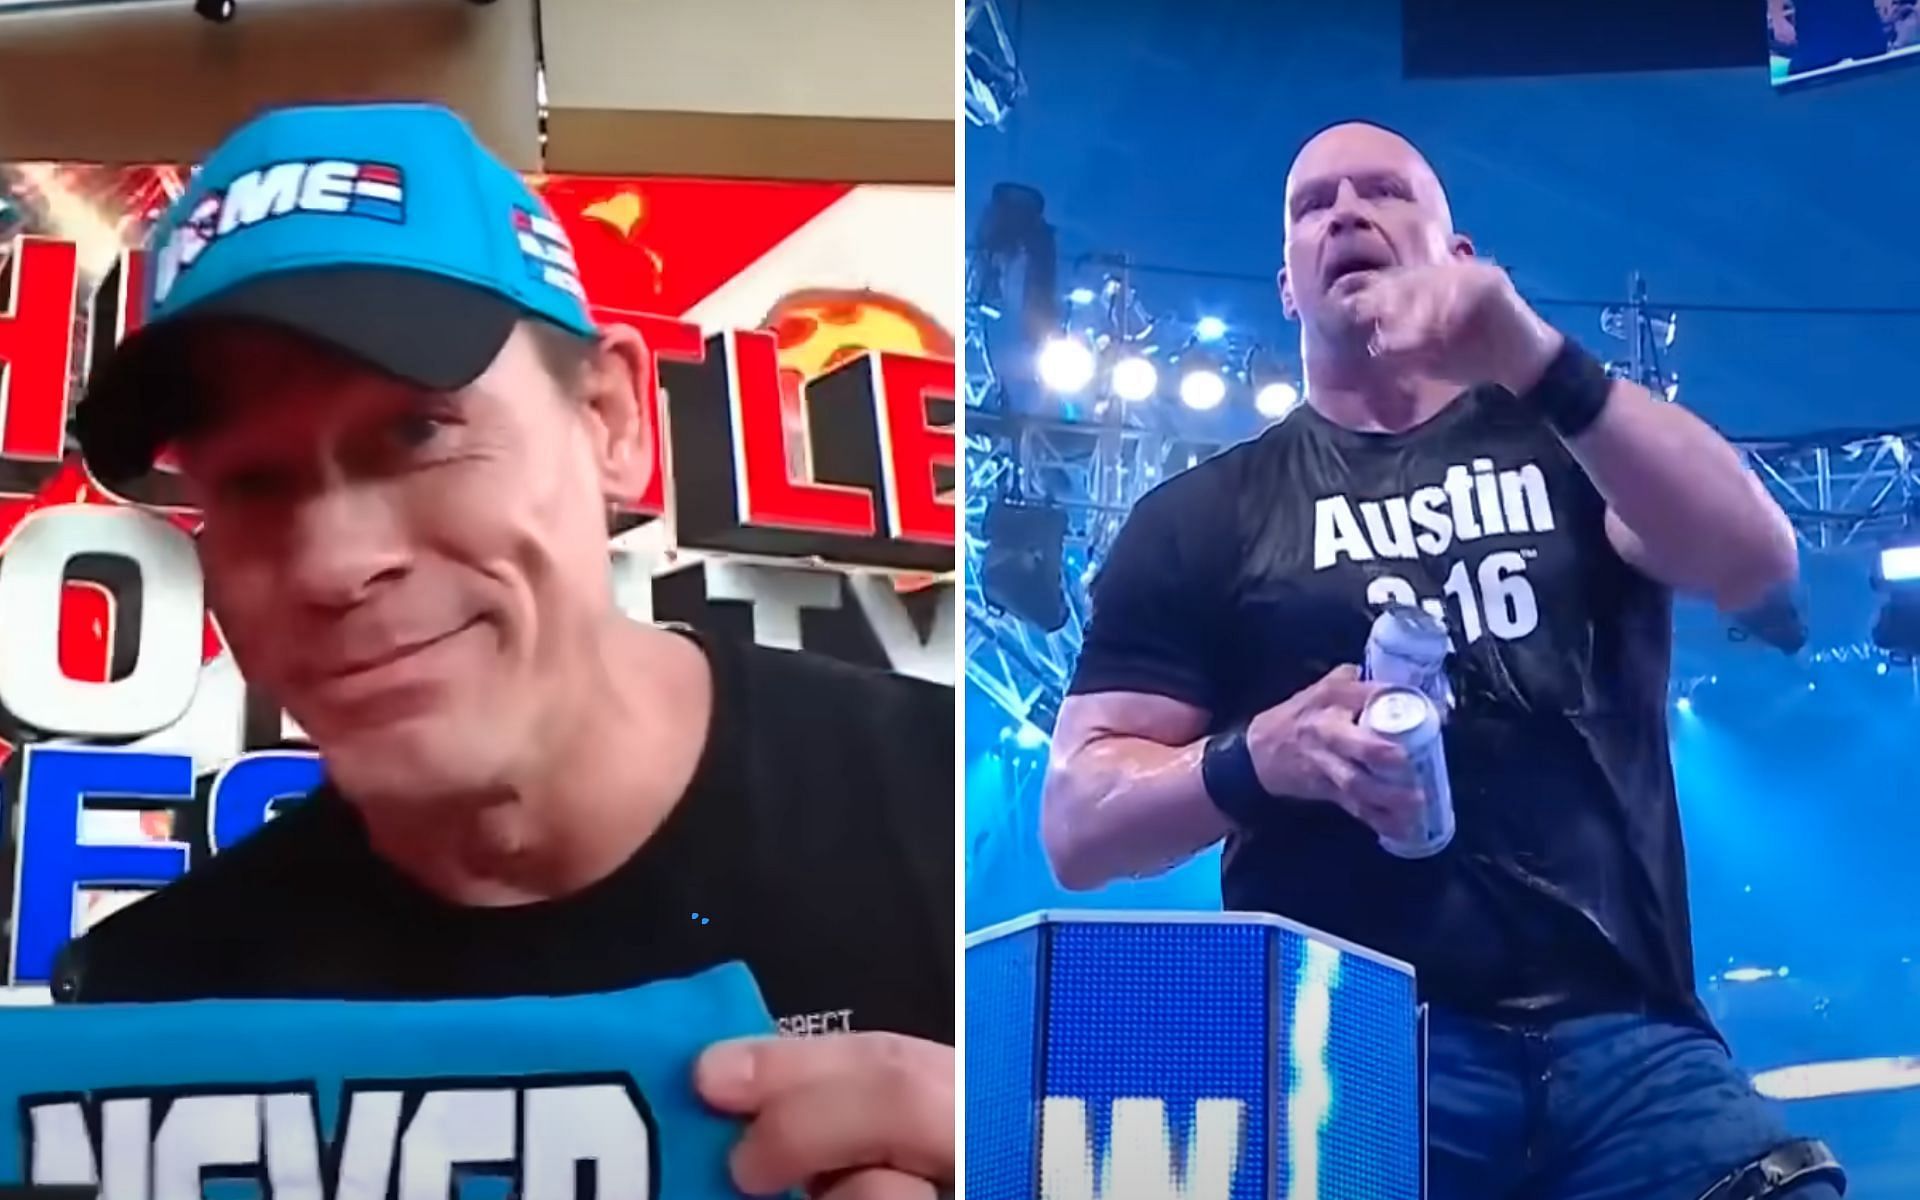 Pictures Courtesy: WWE on YouTube